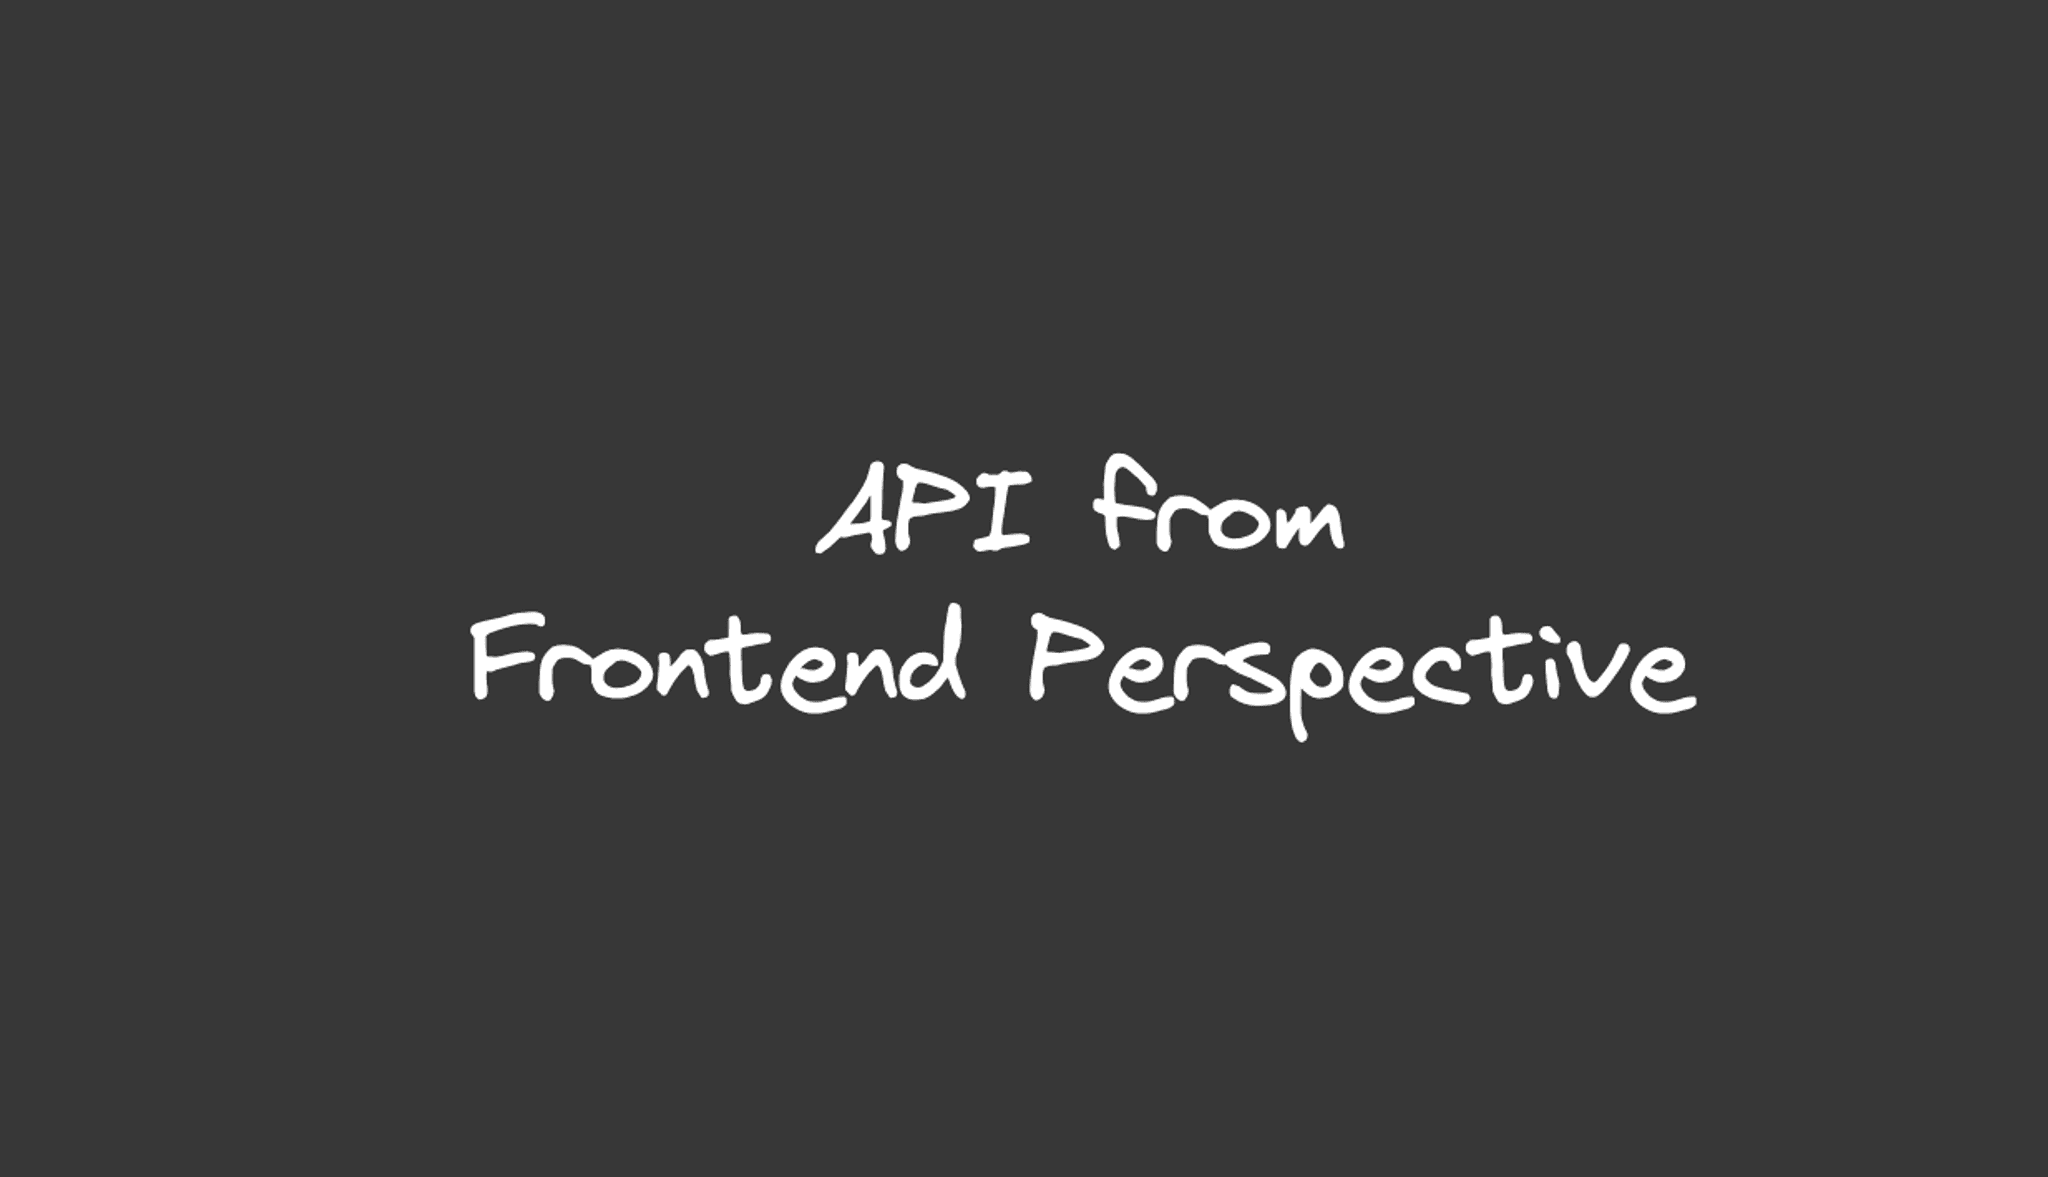 An image containing the text, "API from Frontend Perspective".